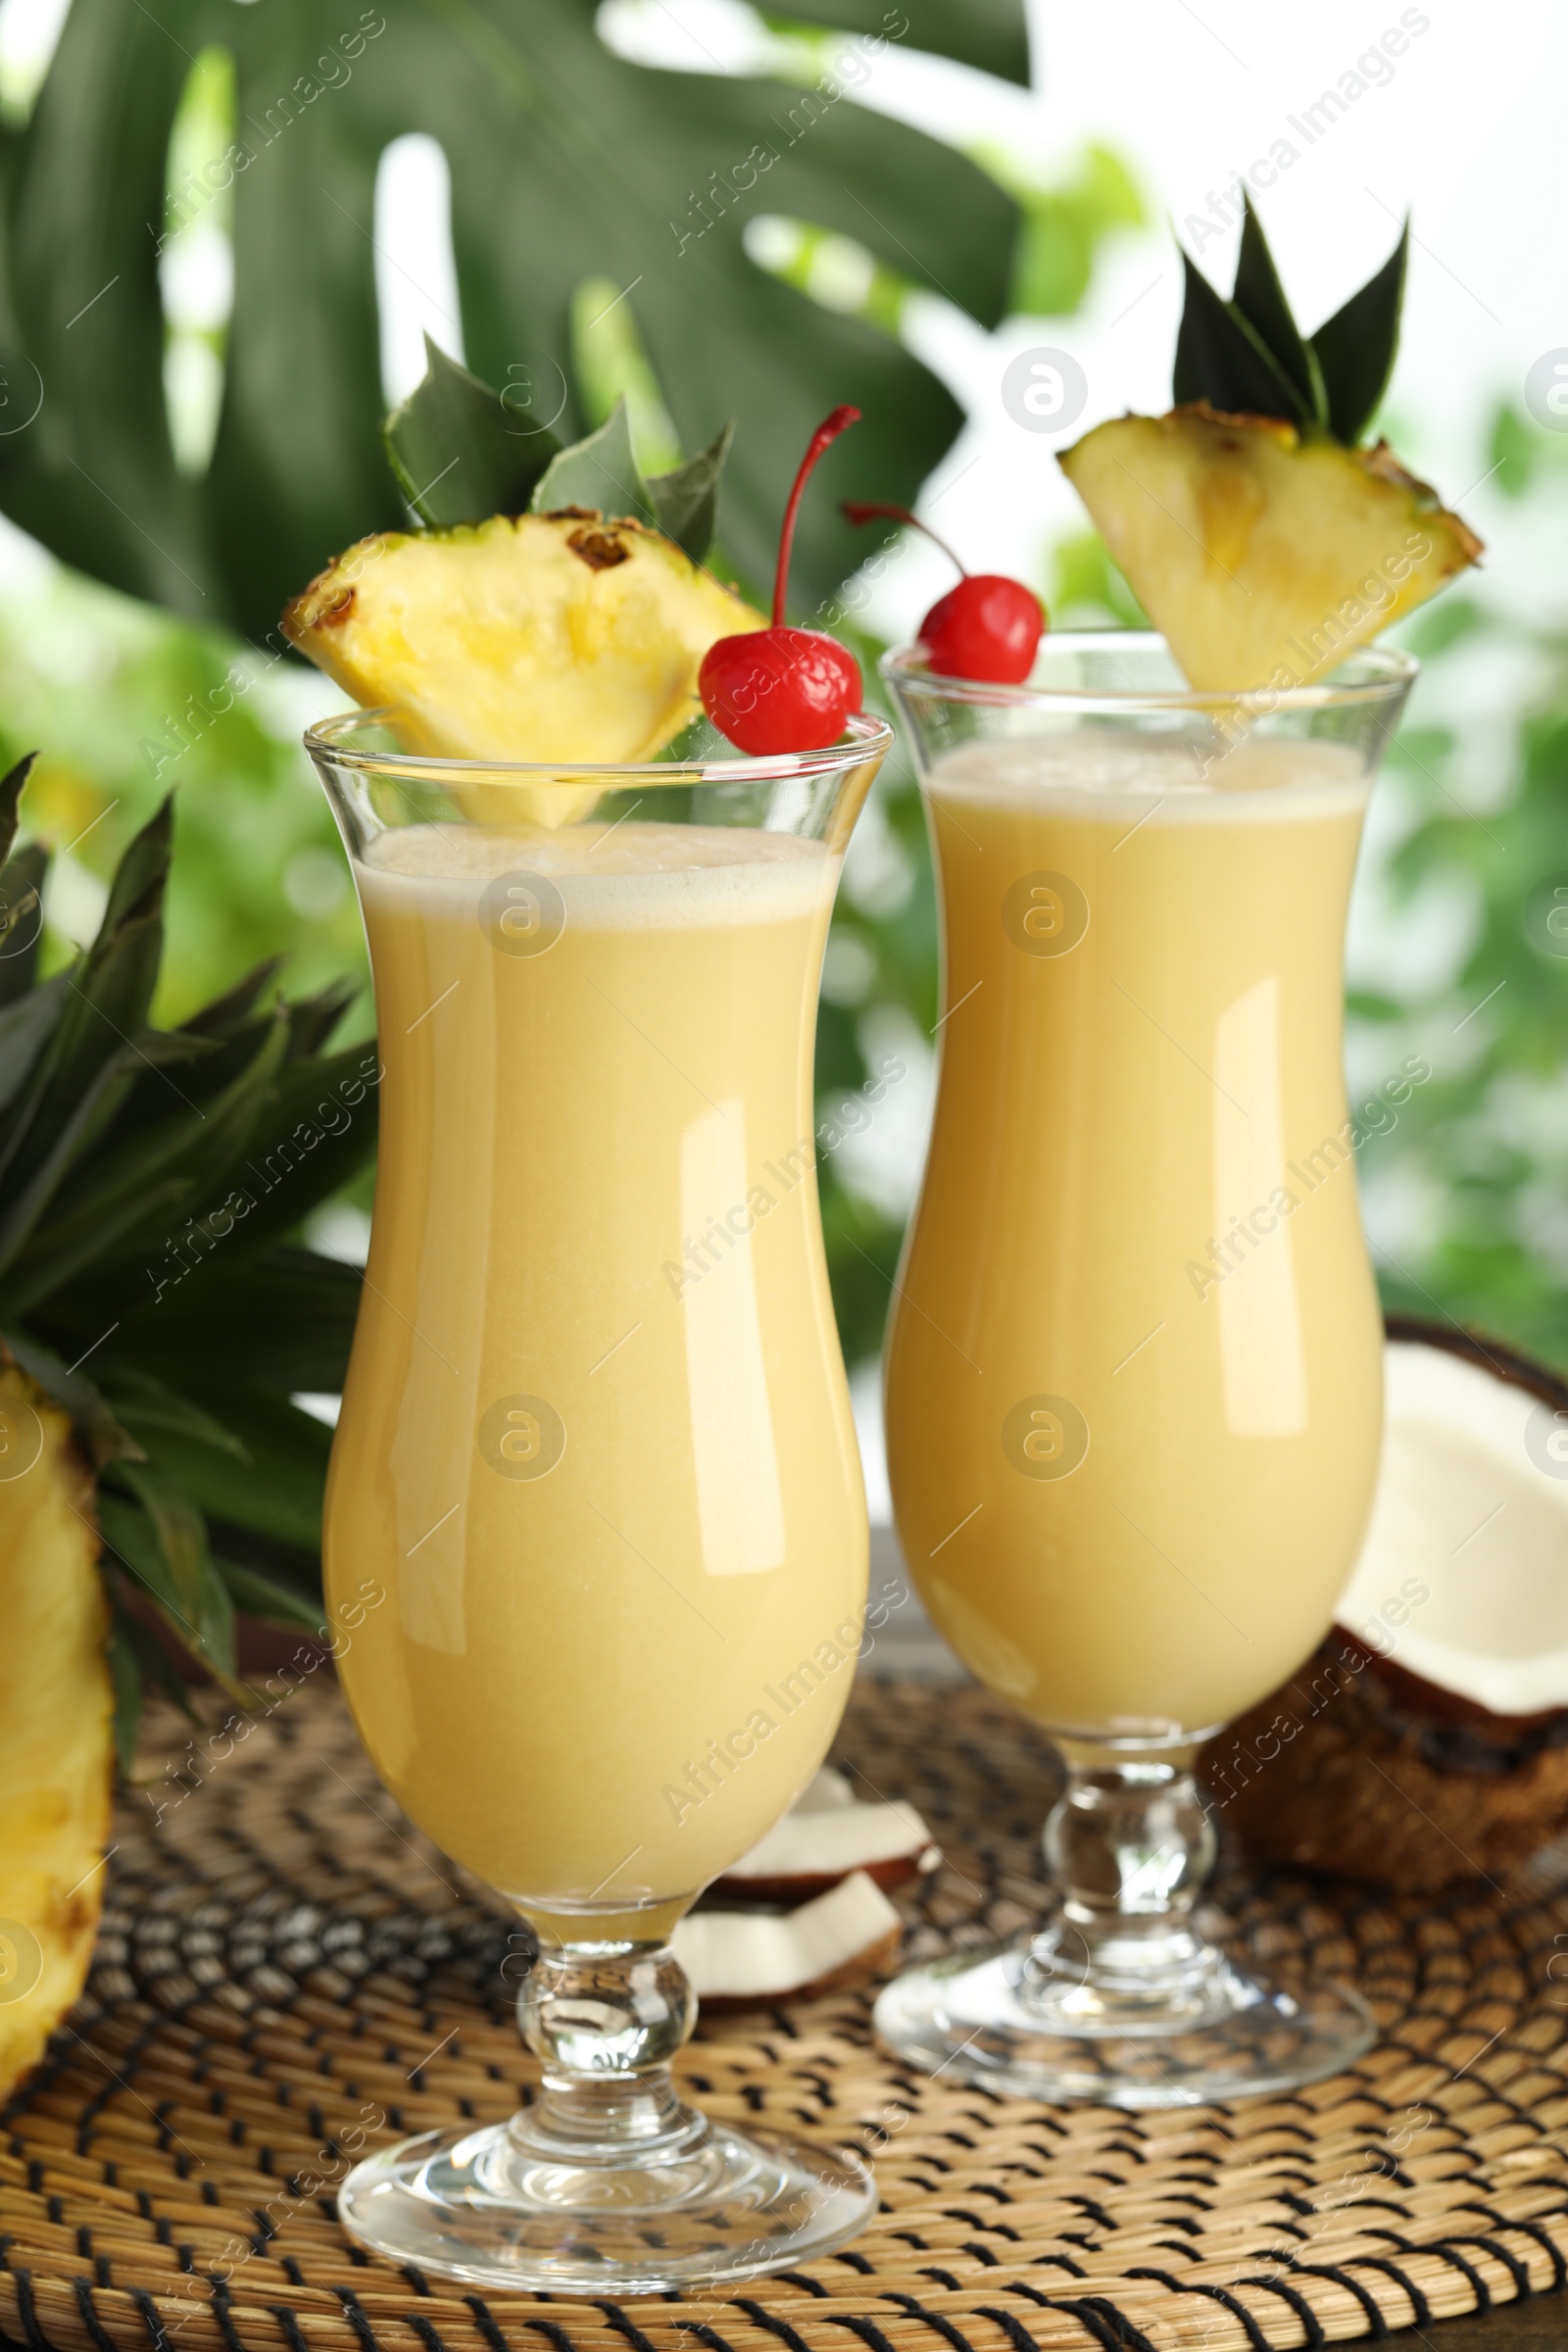 Photo of Tasty Pina Colada cocktails and ingredients on wicker mat